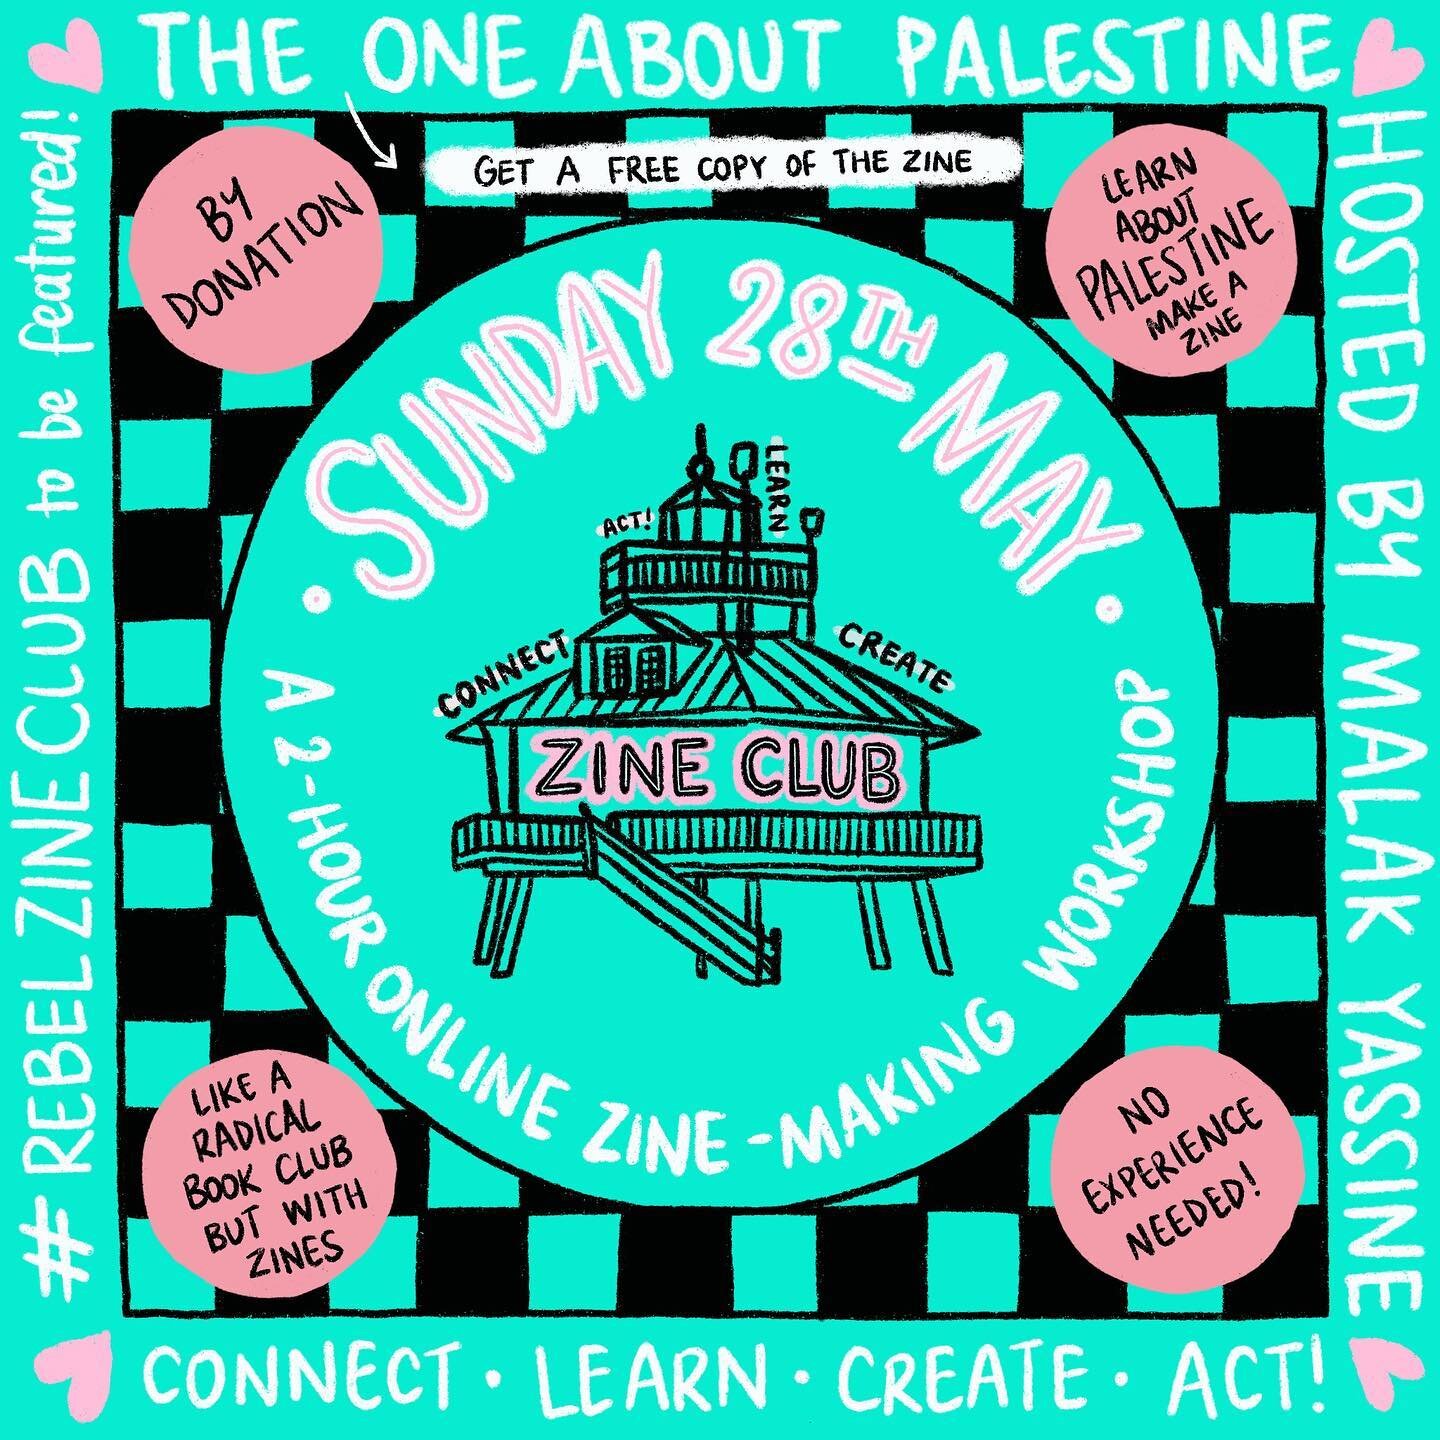 🥁🥁🥁 Introducing&hellip; Rebel Zine Club: The one about Palestine 🇵🇸 

Join us on Sunday 28th May 11am - 1pm for a 2 hour online zine-making session and discussion about the moment to liberate Palestine.

The wonderful @awholeheartedsoul will be 